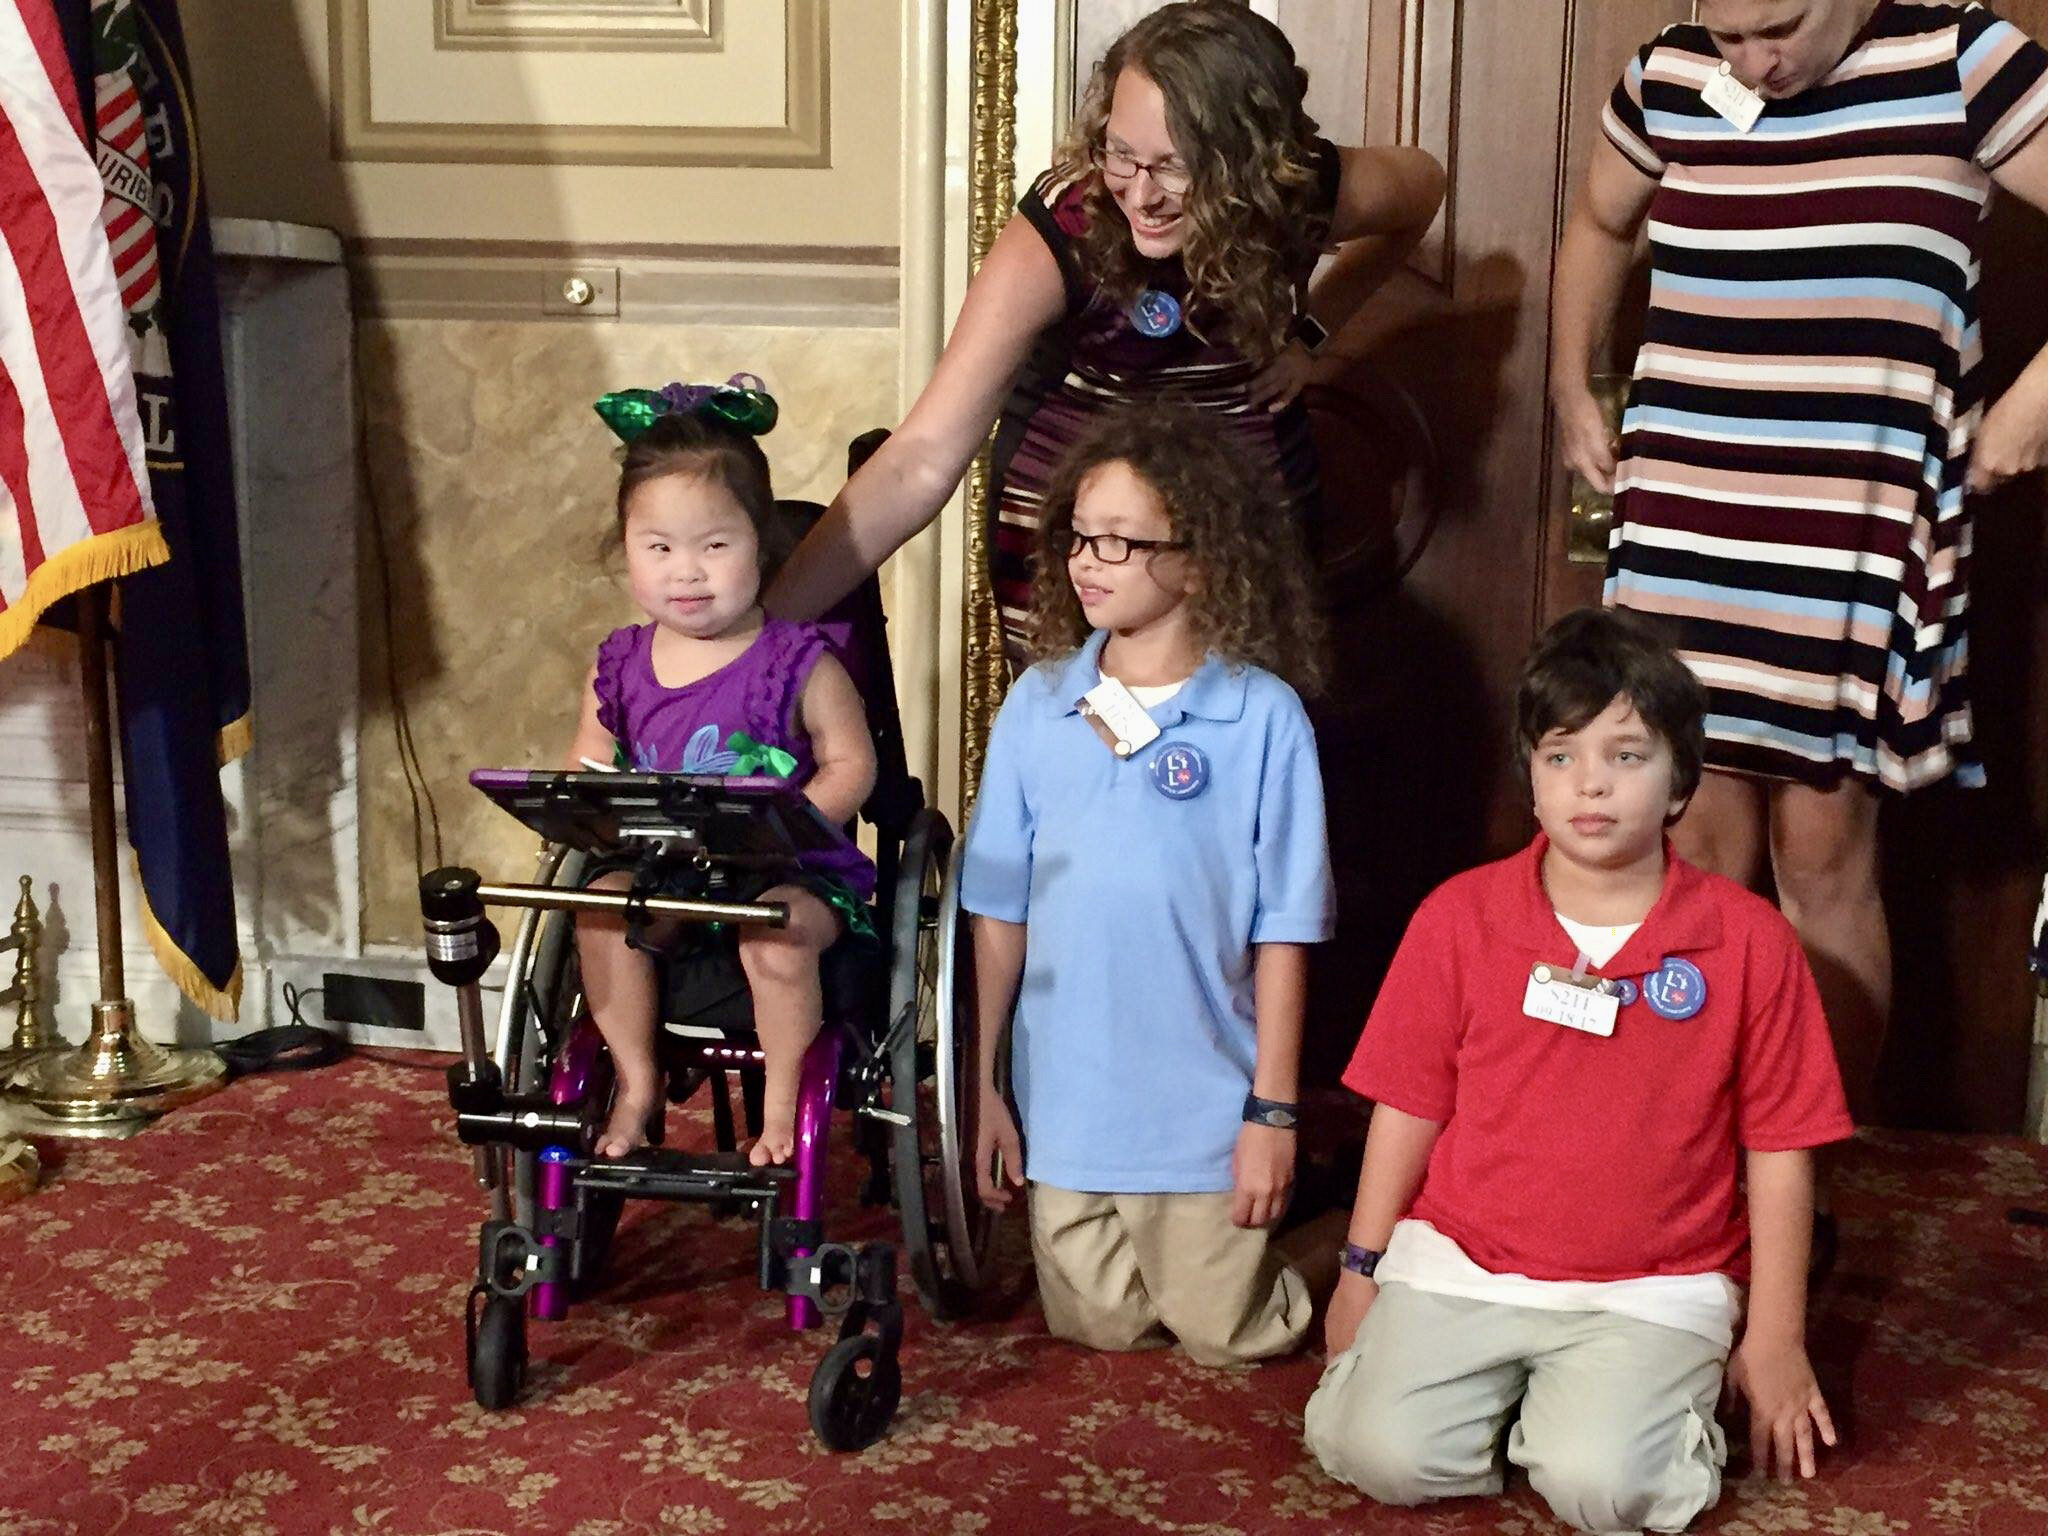  Little Lobbyists families pose during a press conference, sitting by decorative doors to the room. 